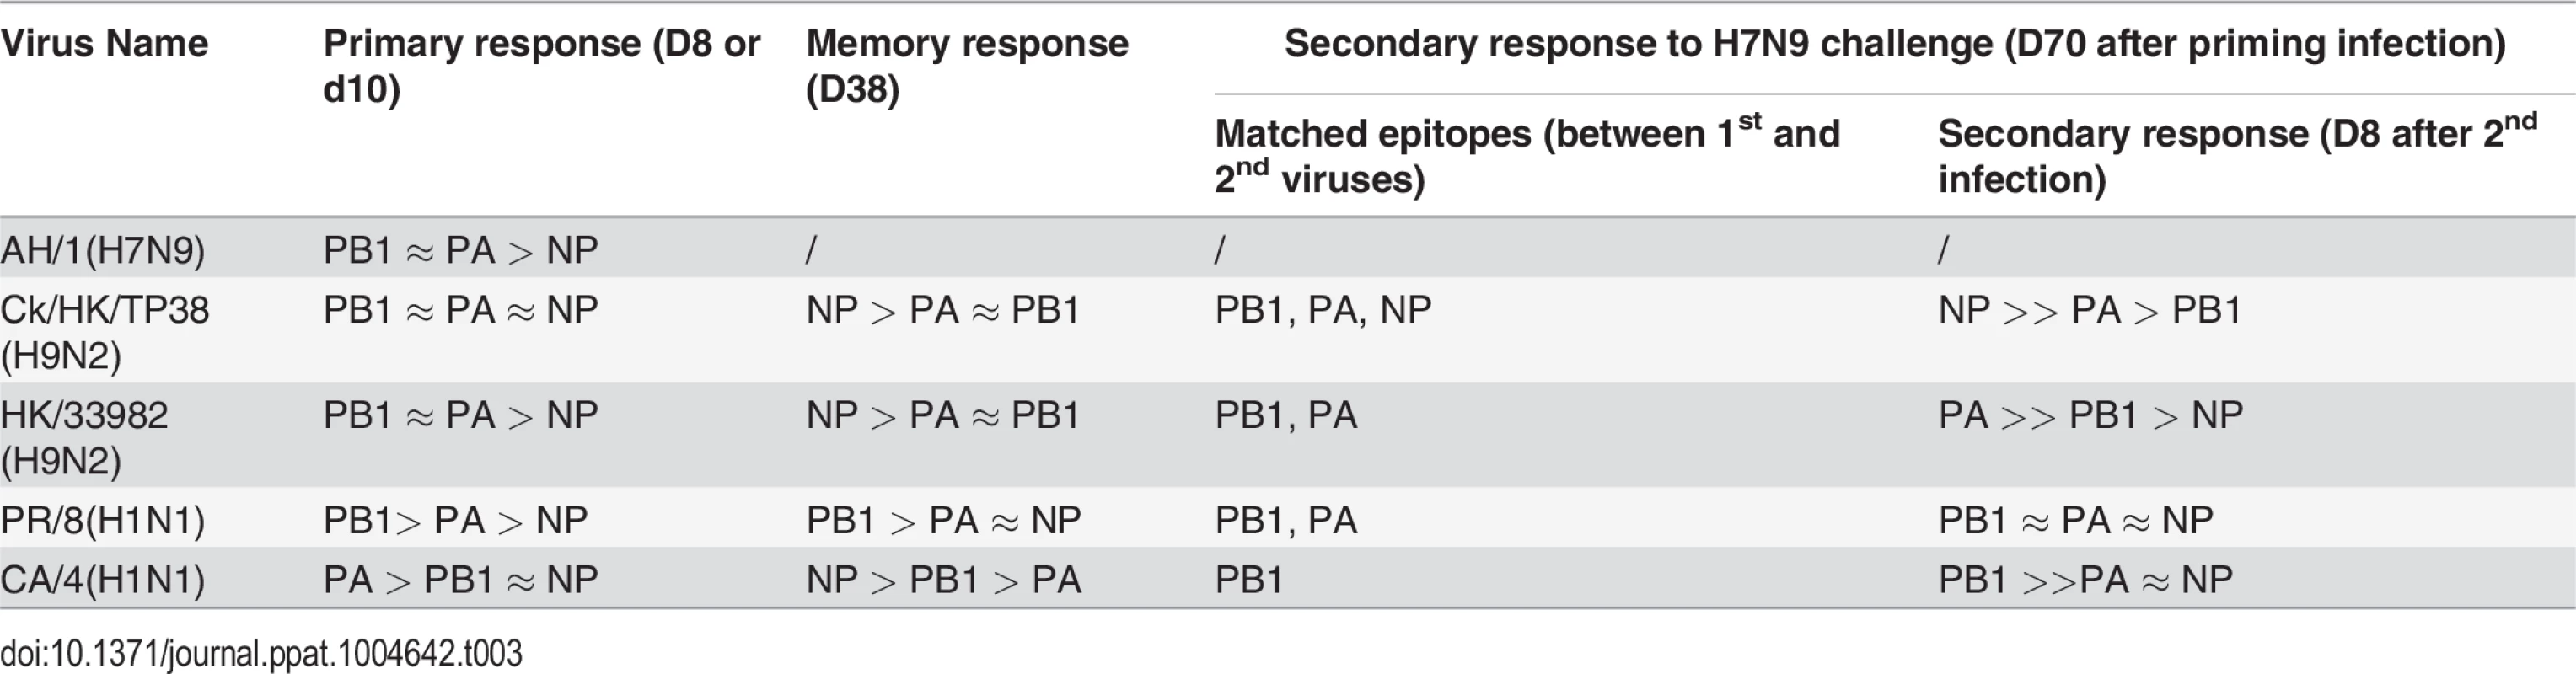 Summary of virus-specific CTL epitope hierarchies.